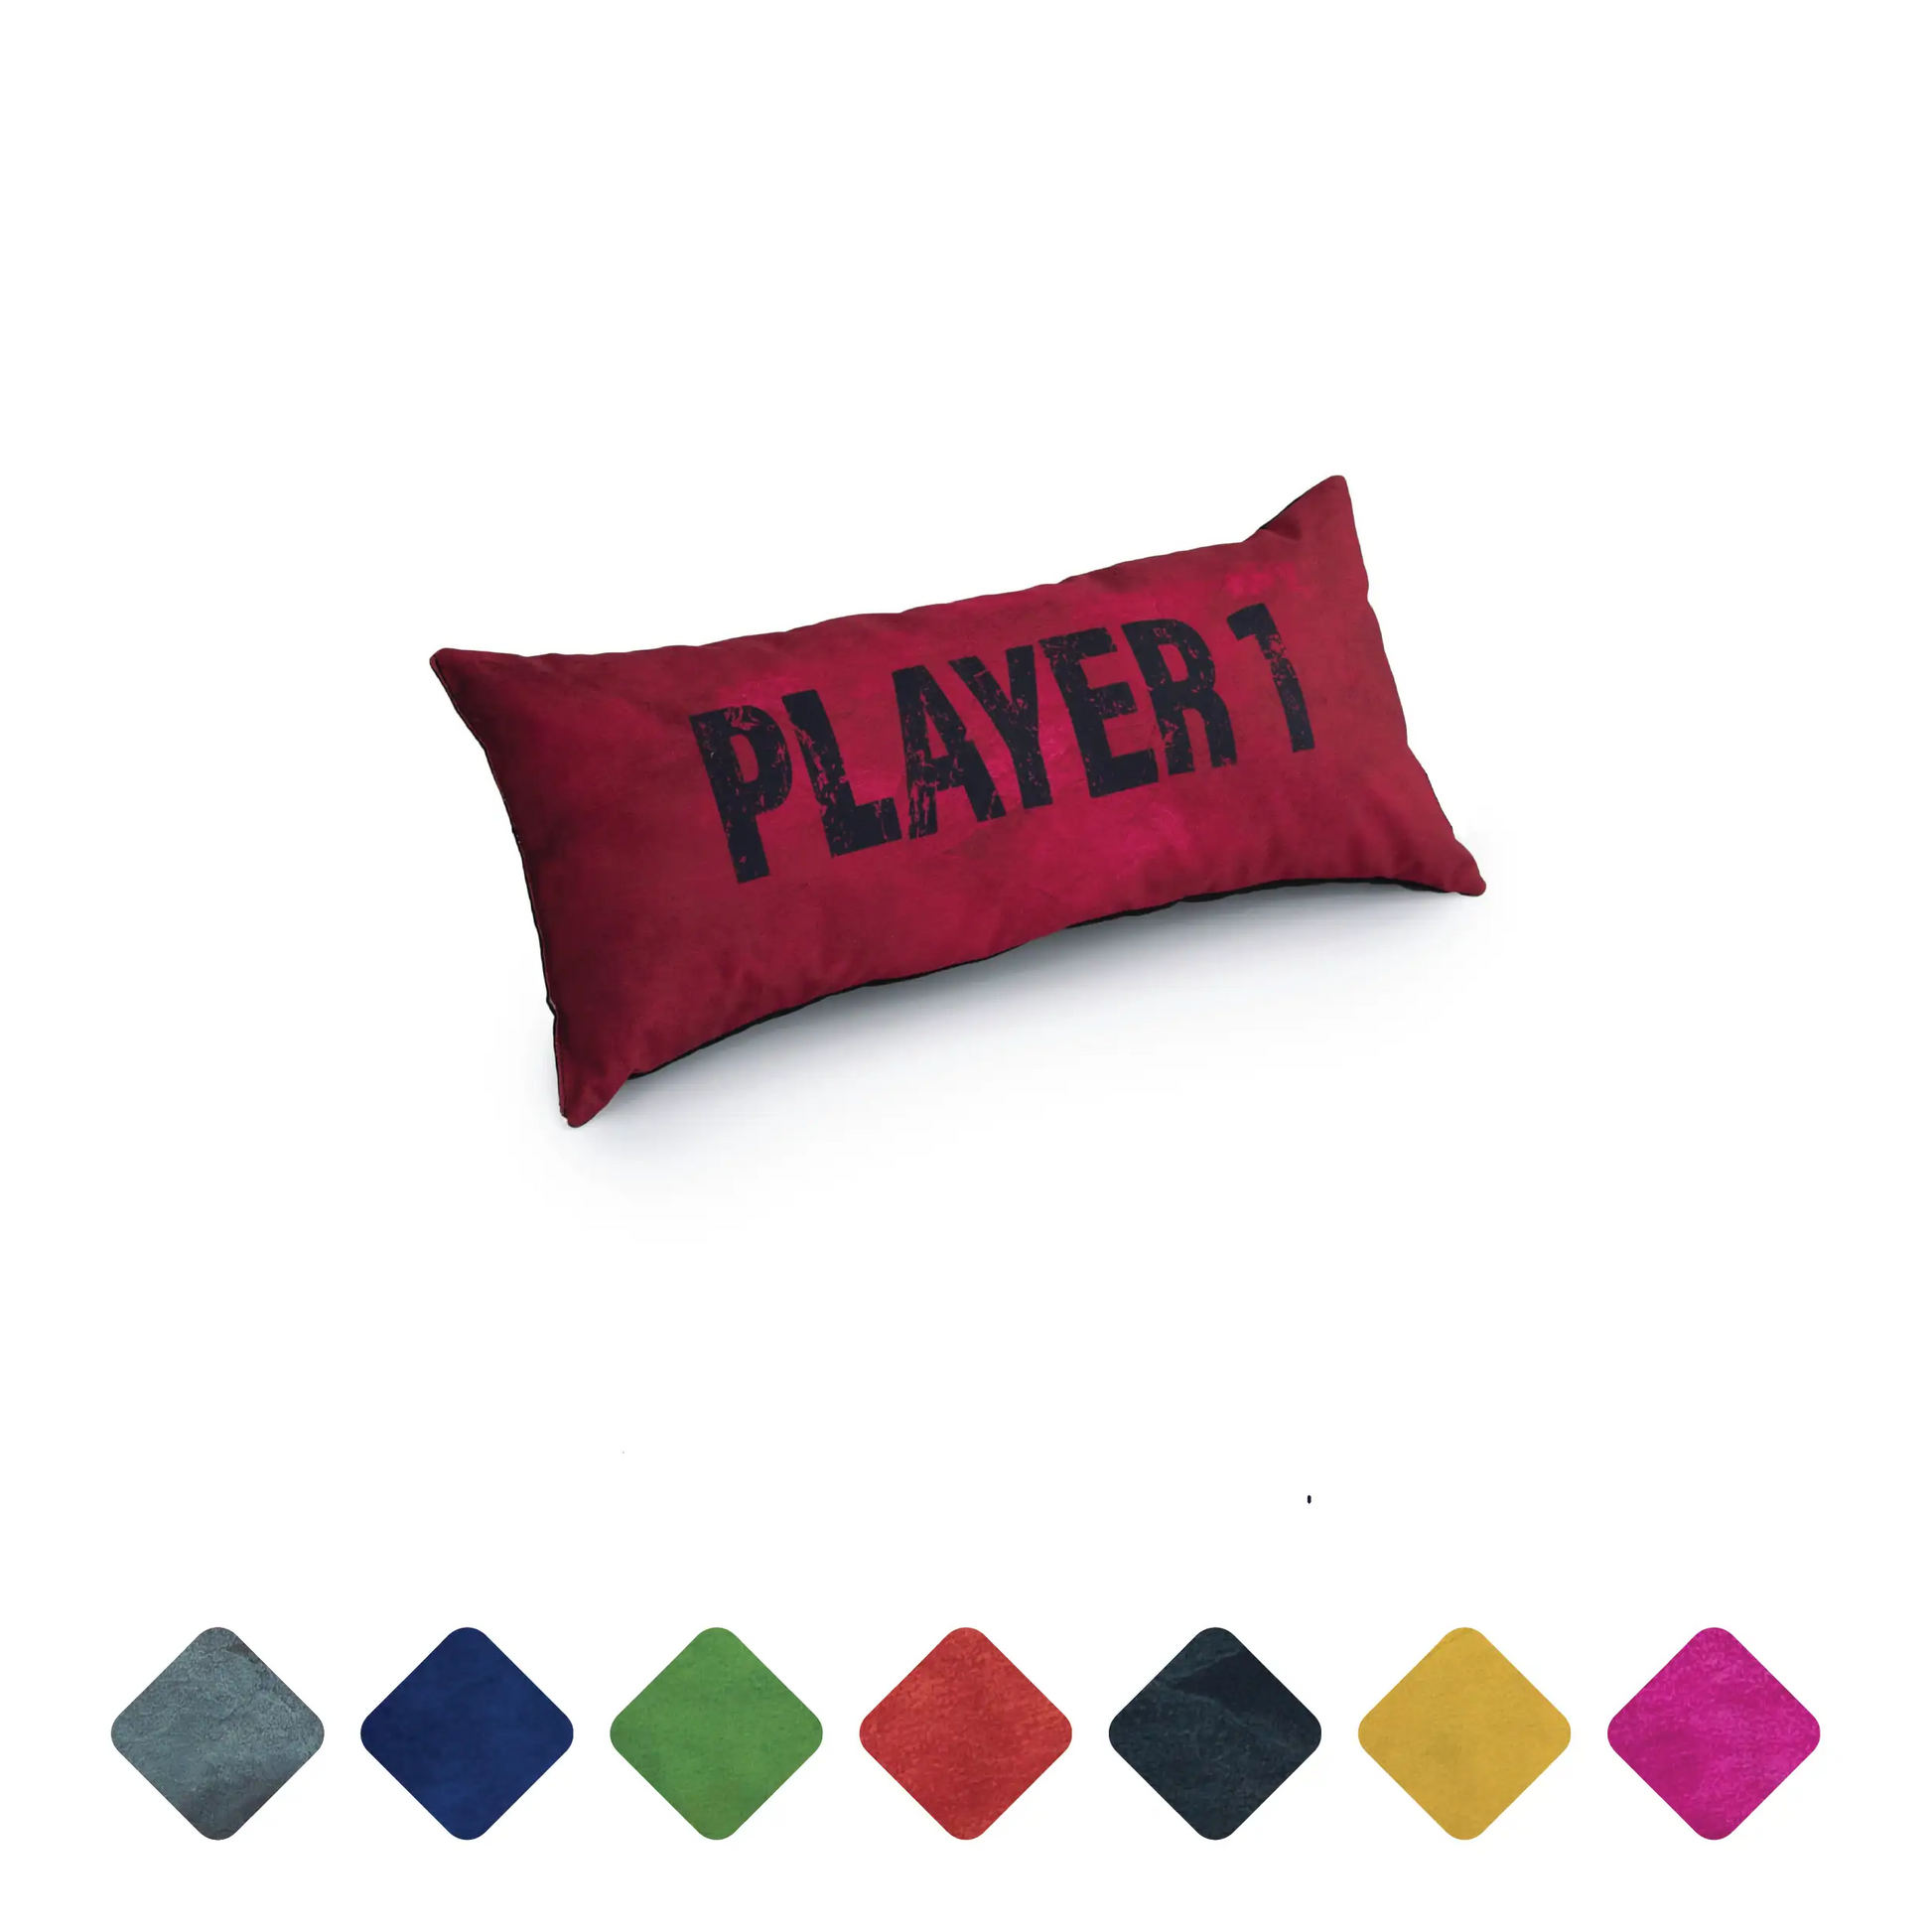 A red pillow with the text "PLAYER 1" written on it.